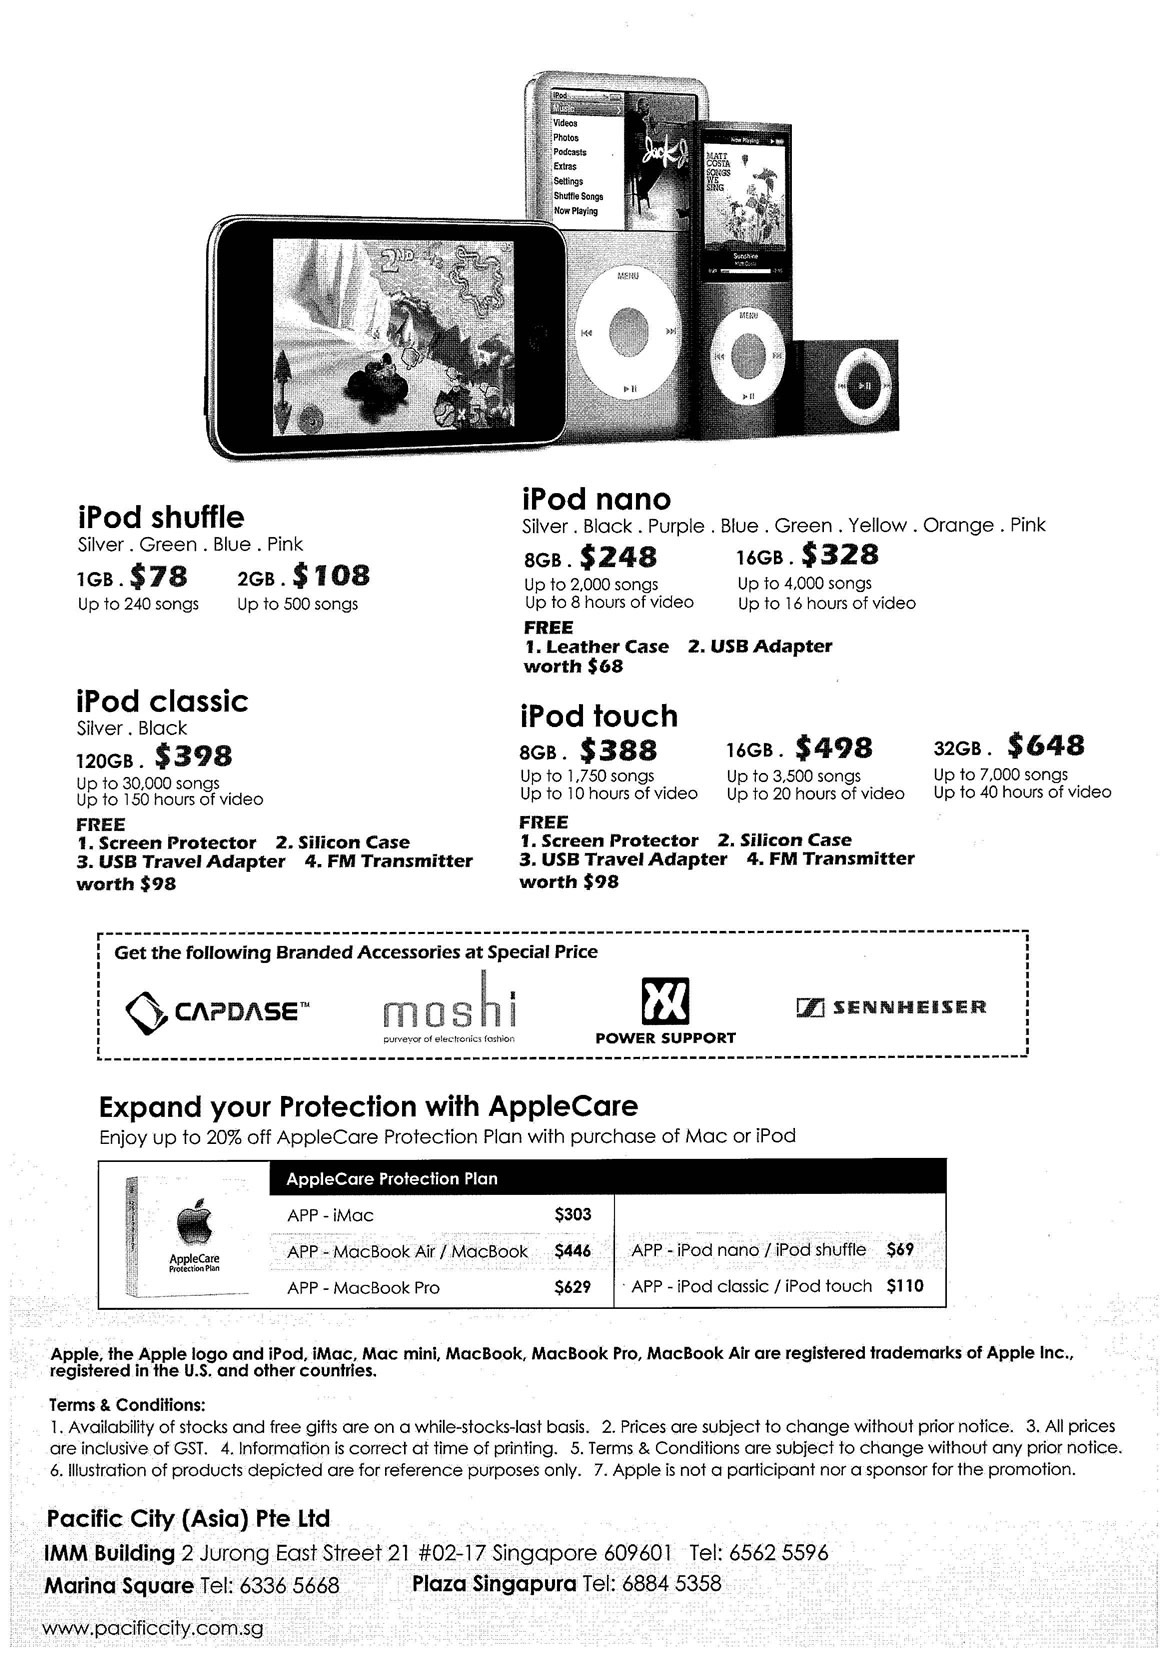 Sitex 2008 price list image brochure of Apple Ipod Pacific City Page 2 - Vr-zone Tclong